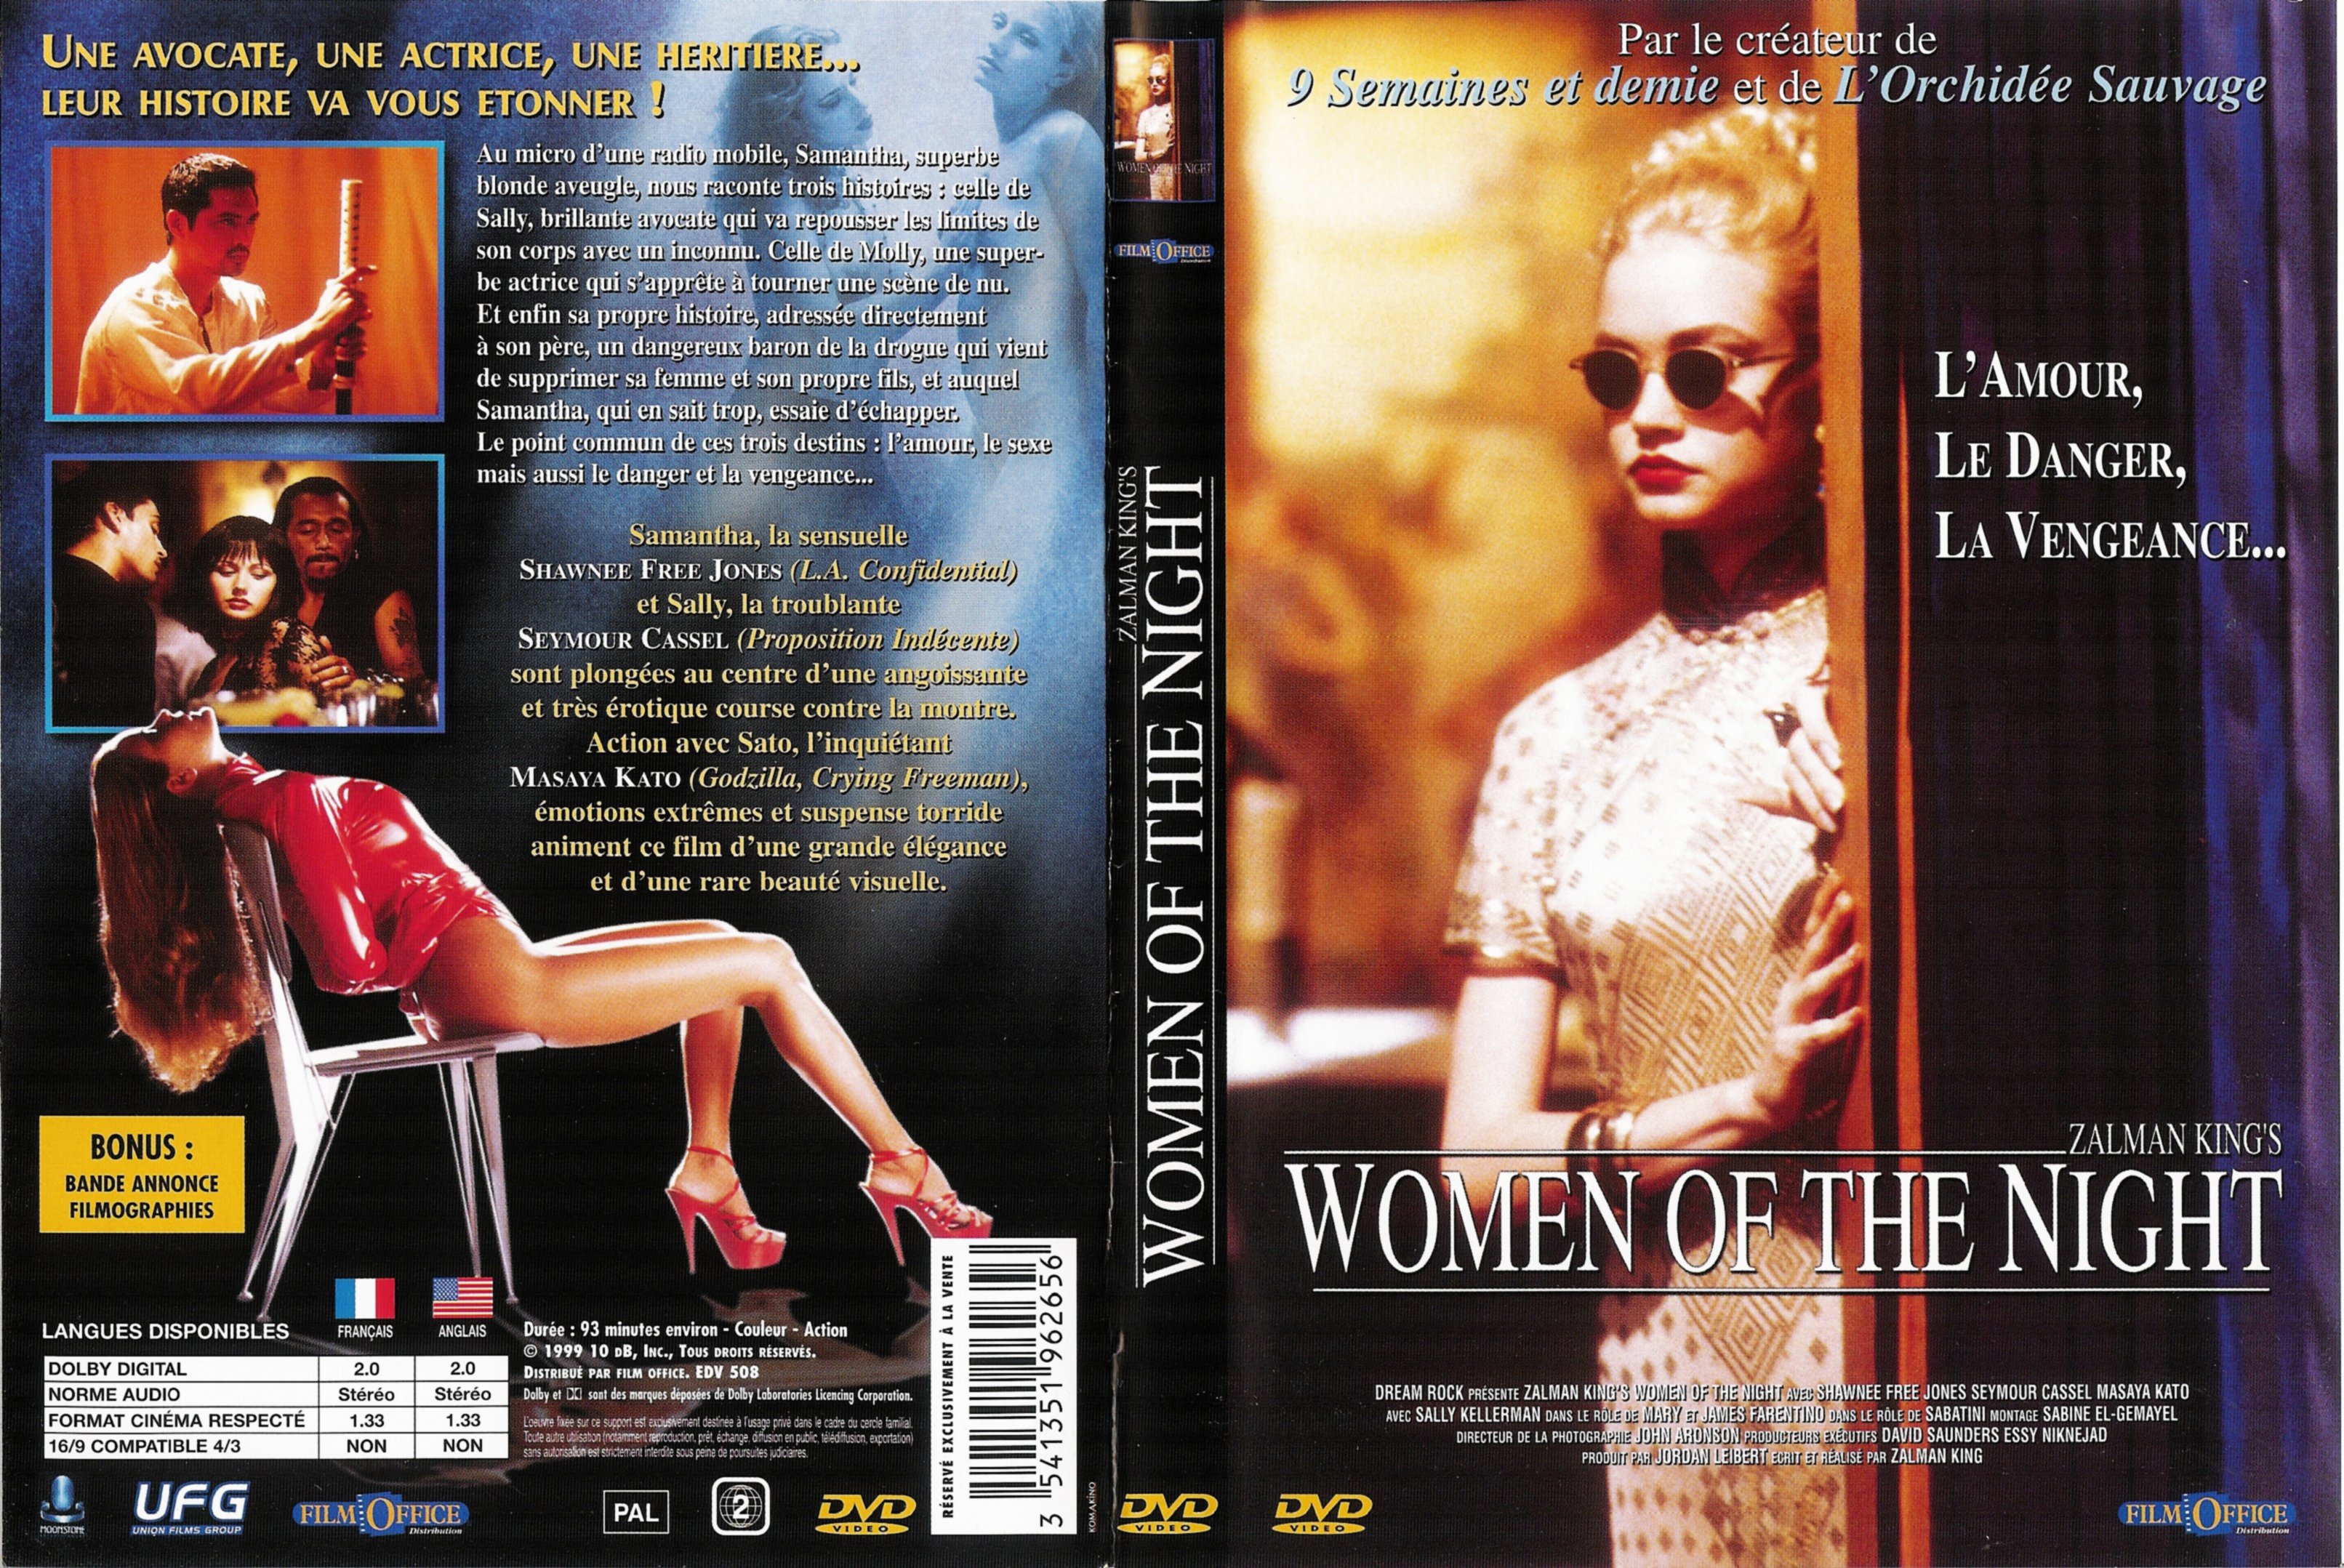 Jaquette DVD Women of the night